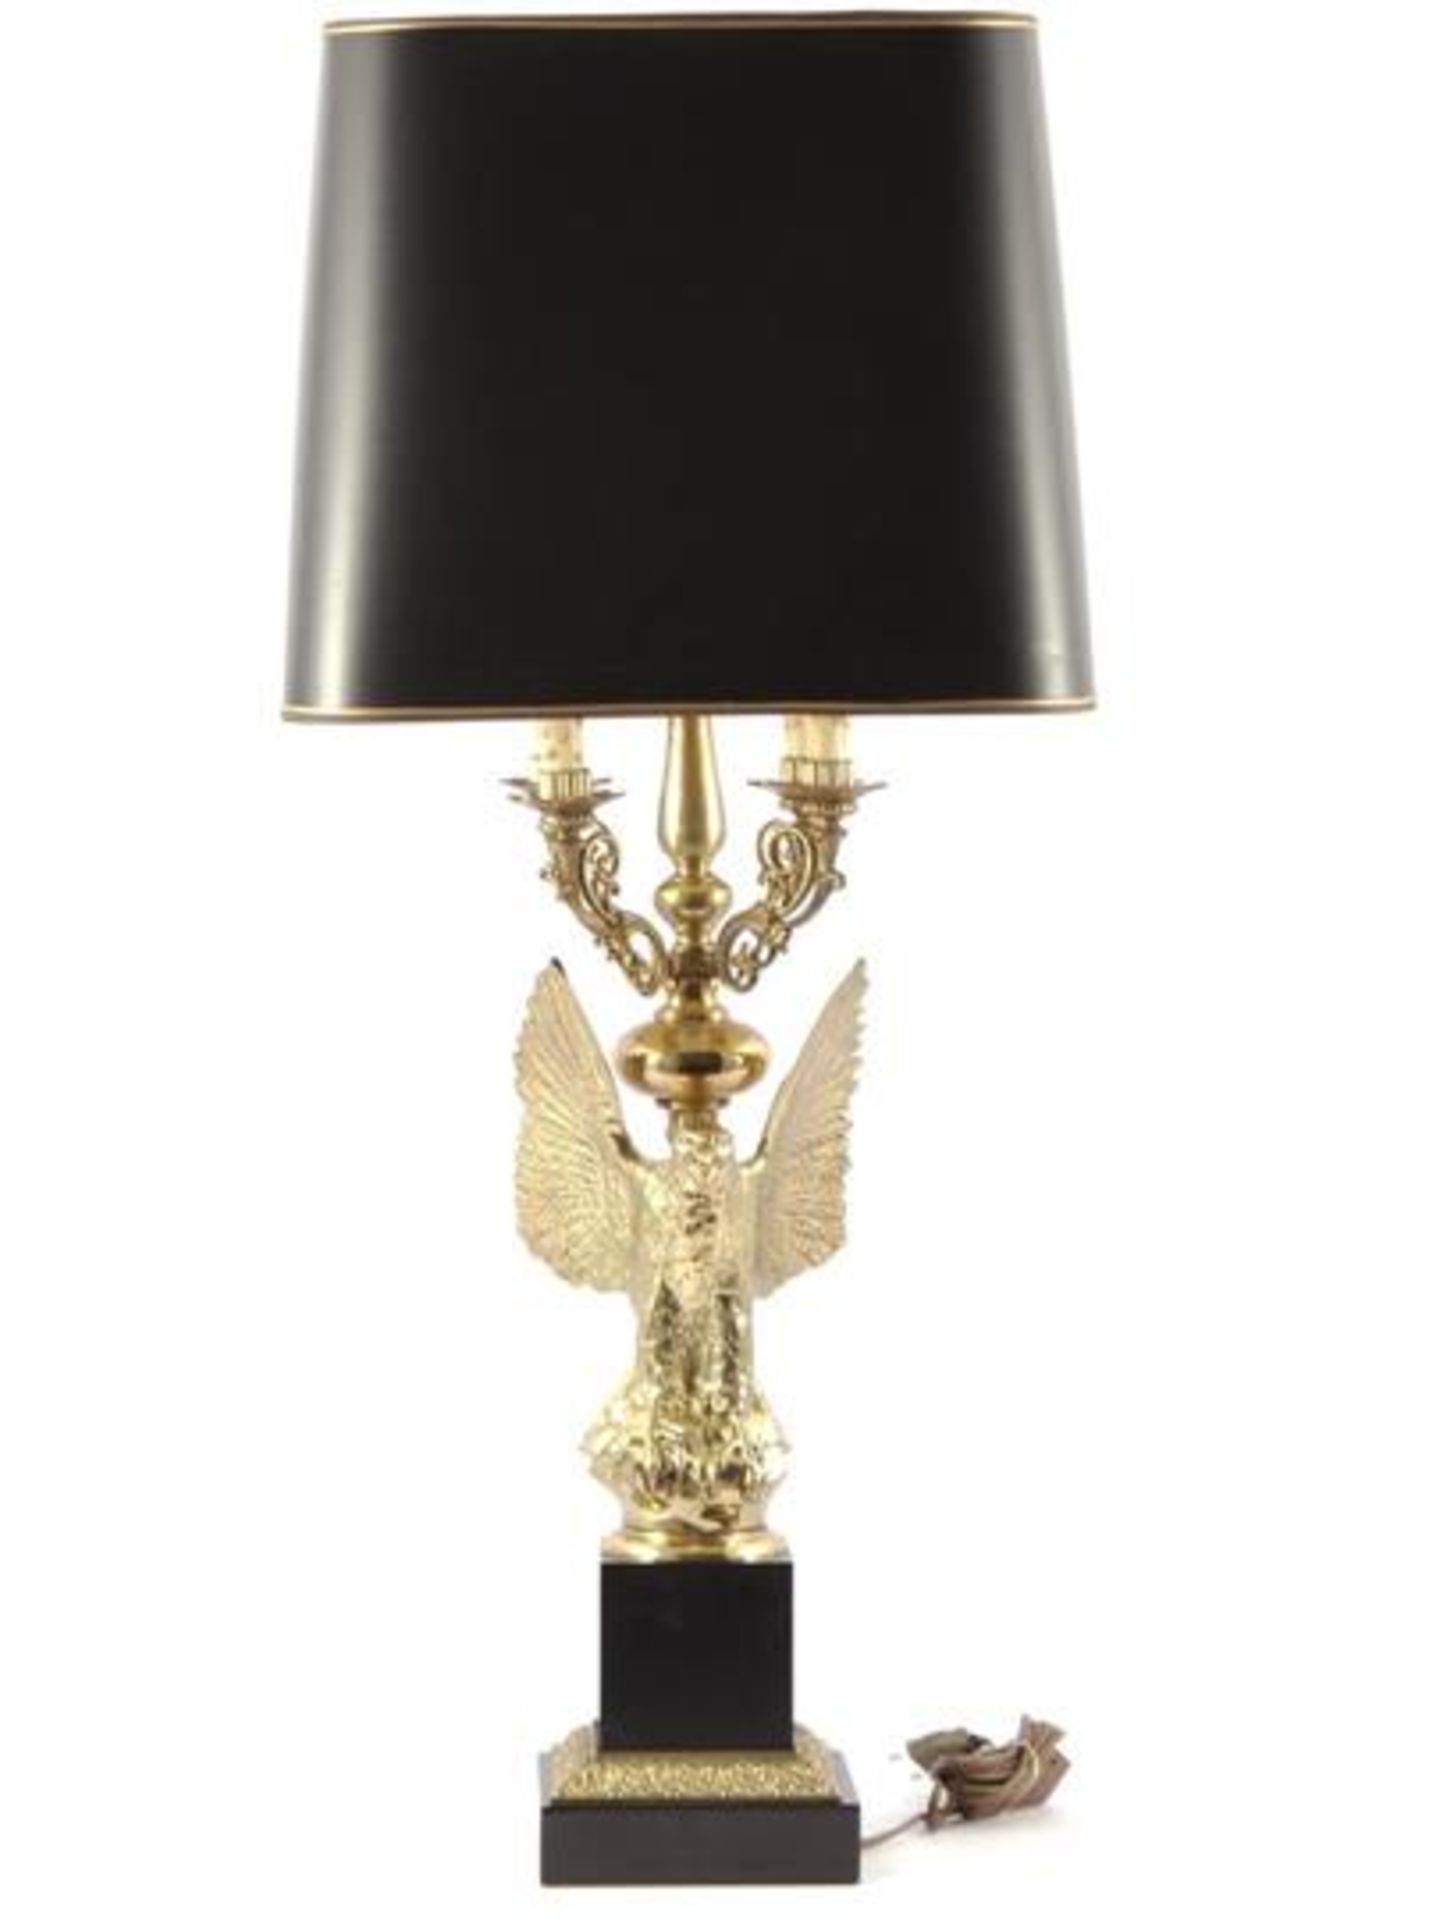 Classic 5-bulb table lamp in Empire style, 94 cm high